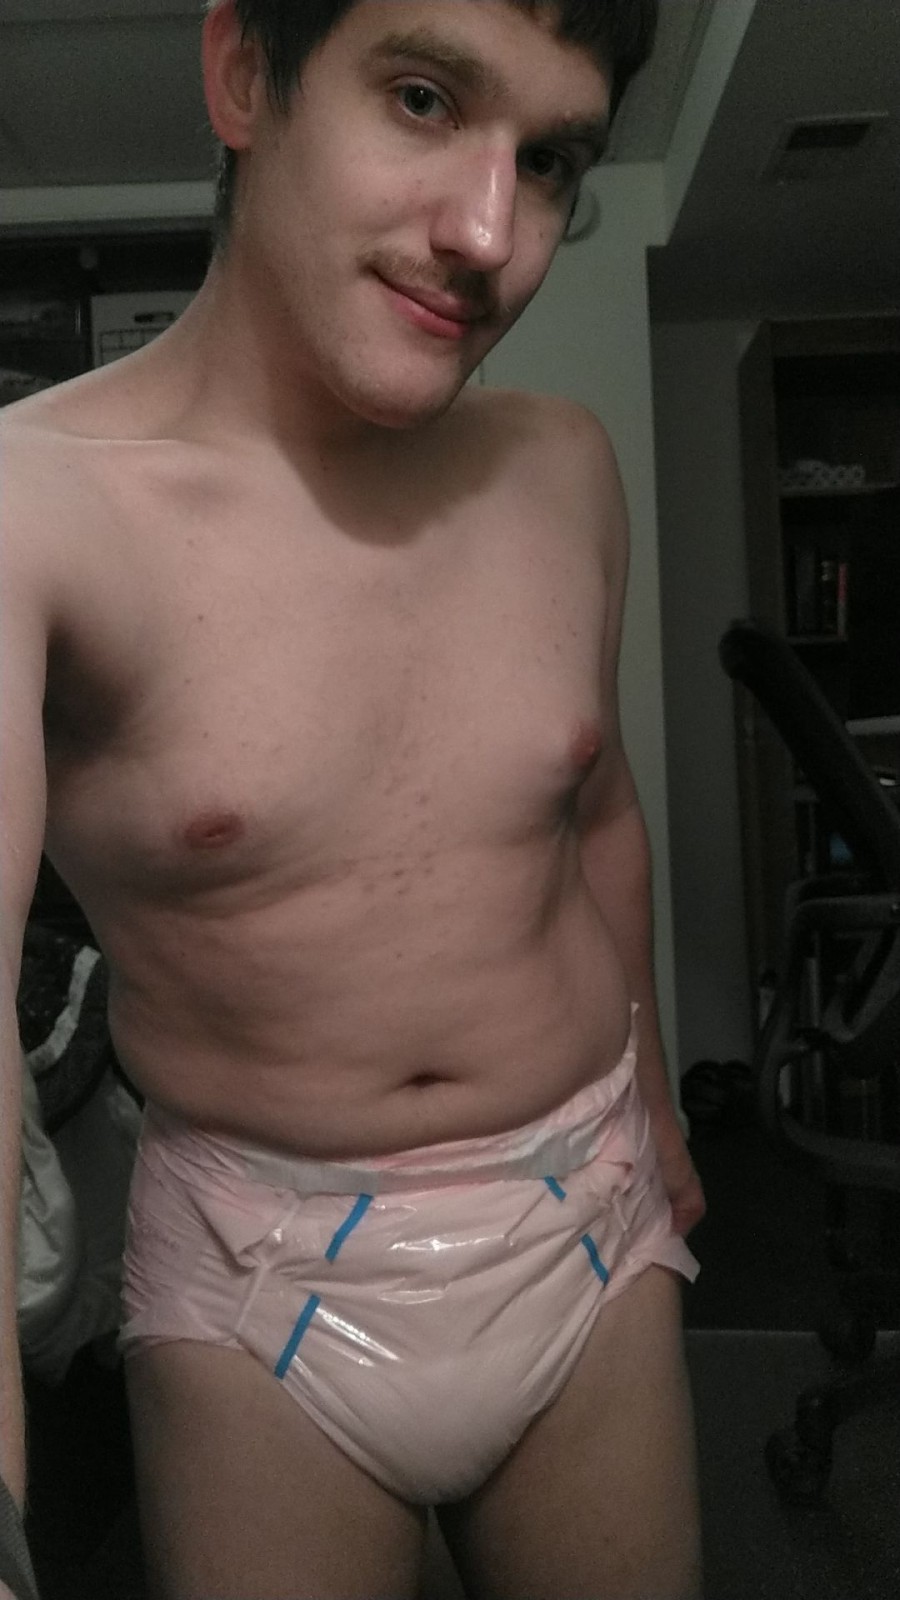 <p>Been hesitant to take pictures, but here's me wearing a comfortable pink Northshore MegaMax diaper. Gifted to @diaperedbutt.</p>